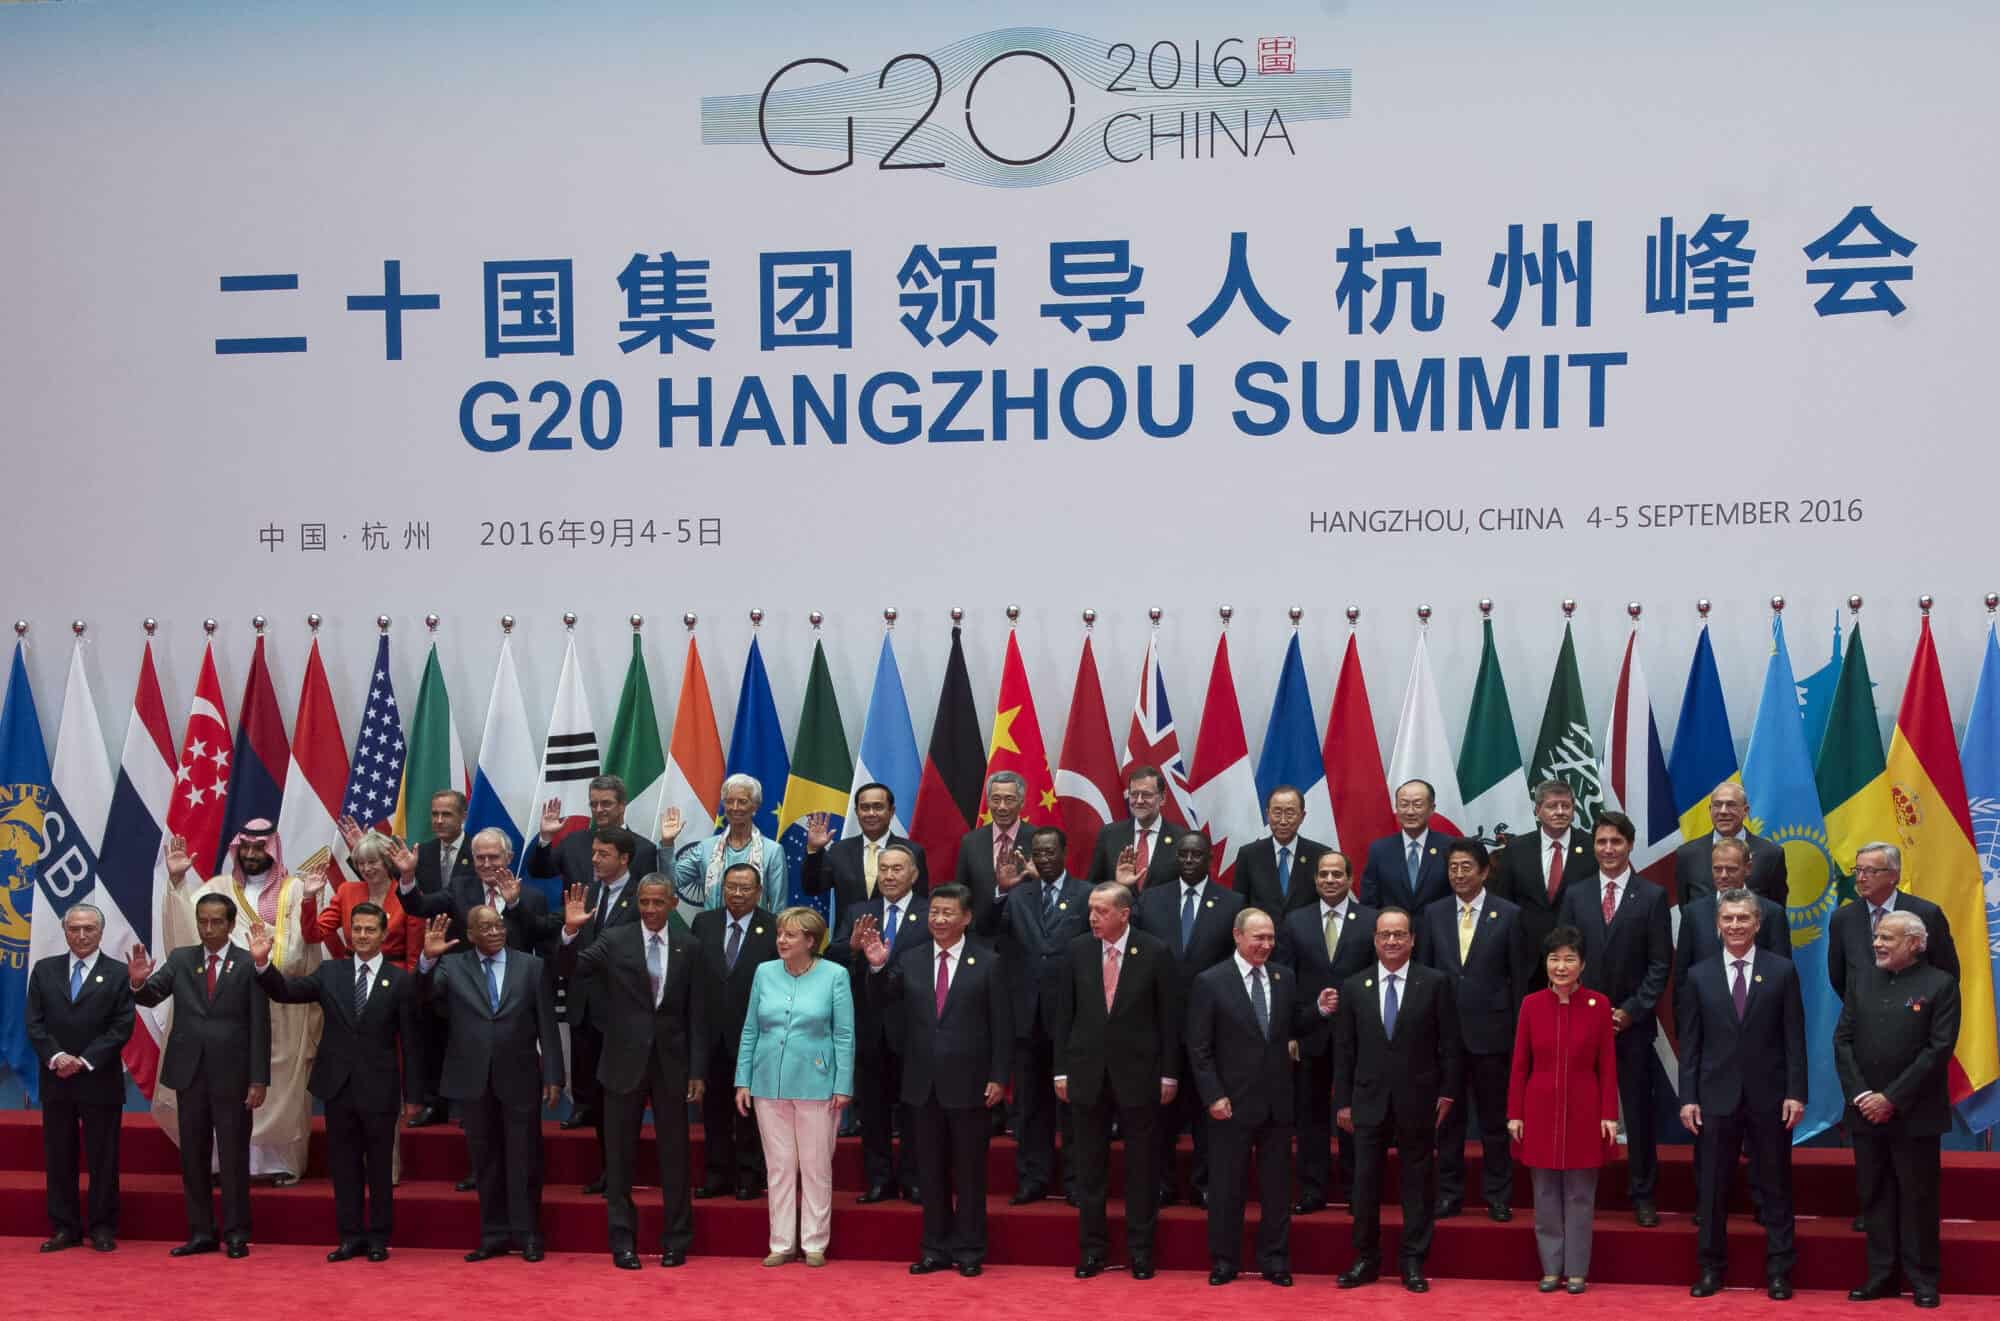 Politician leaders of the G20 at the 2016 Summit in Hangzhou, China.